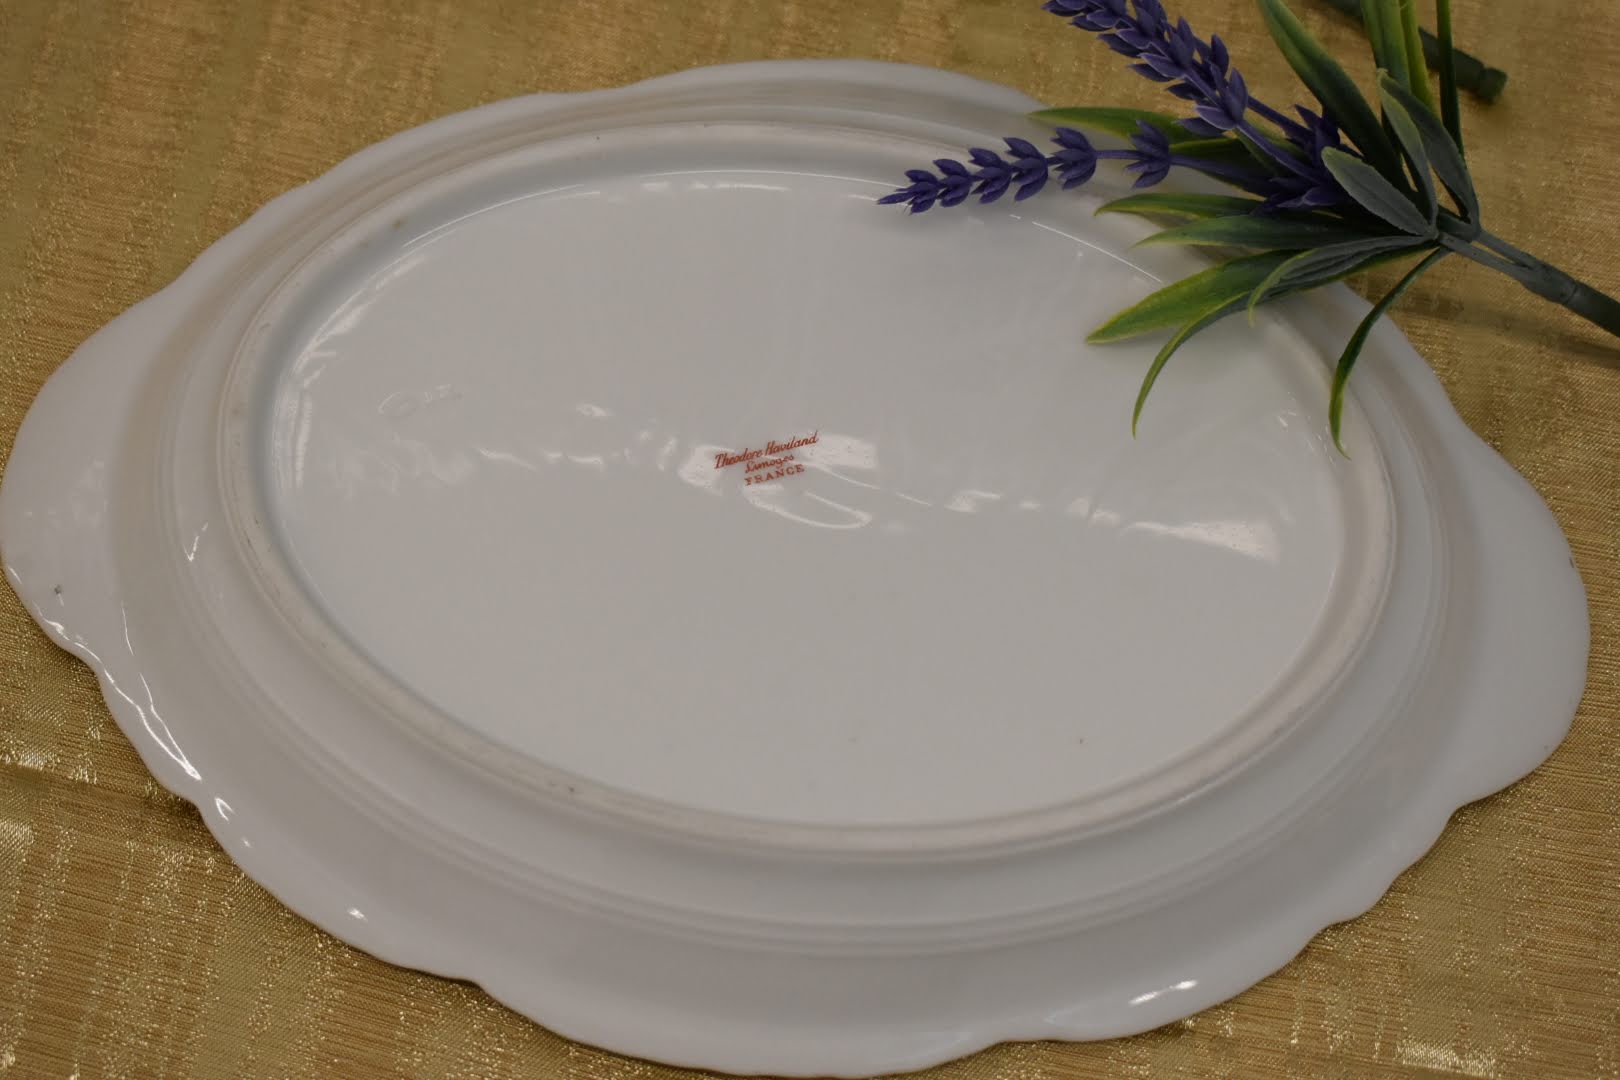 Limoges Theodore Haviland Porcelain Fine China - Mid Century - Oval Platter - Blue White Green Floral Pattern - From France - Gold Trim